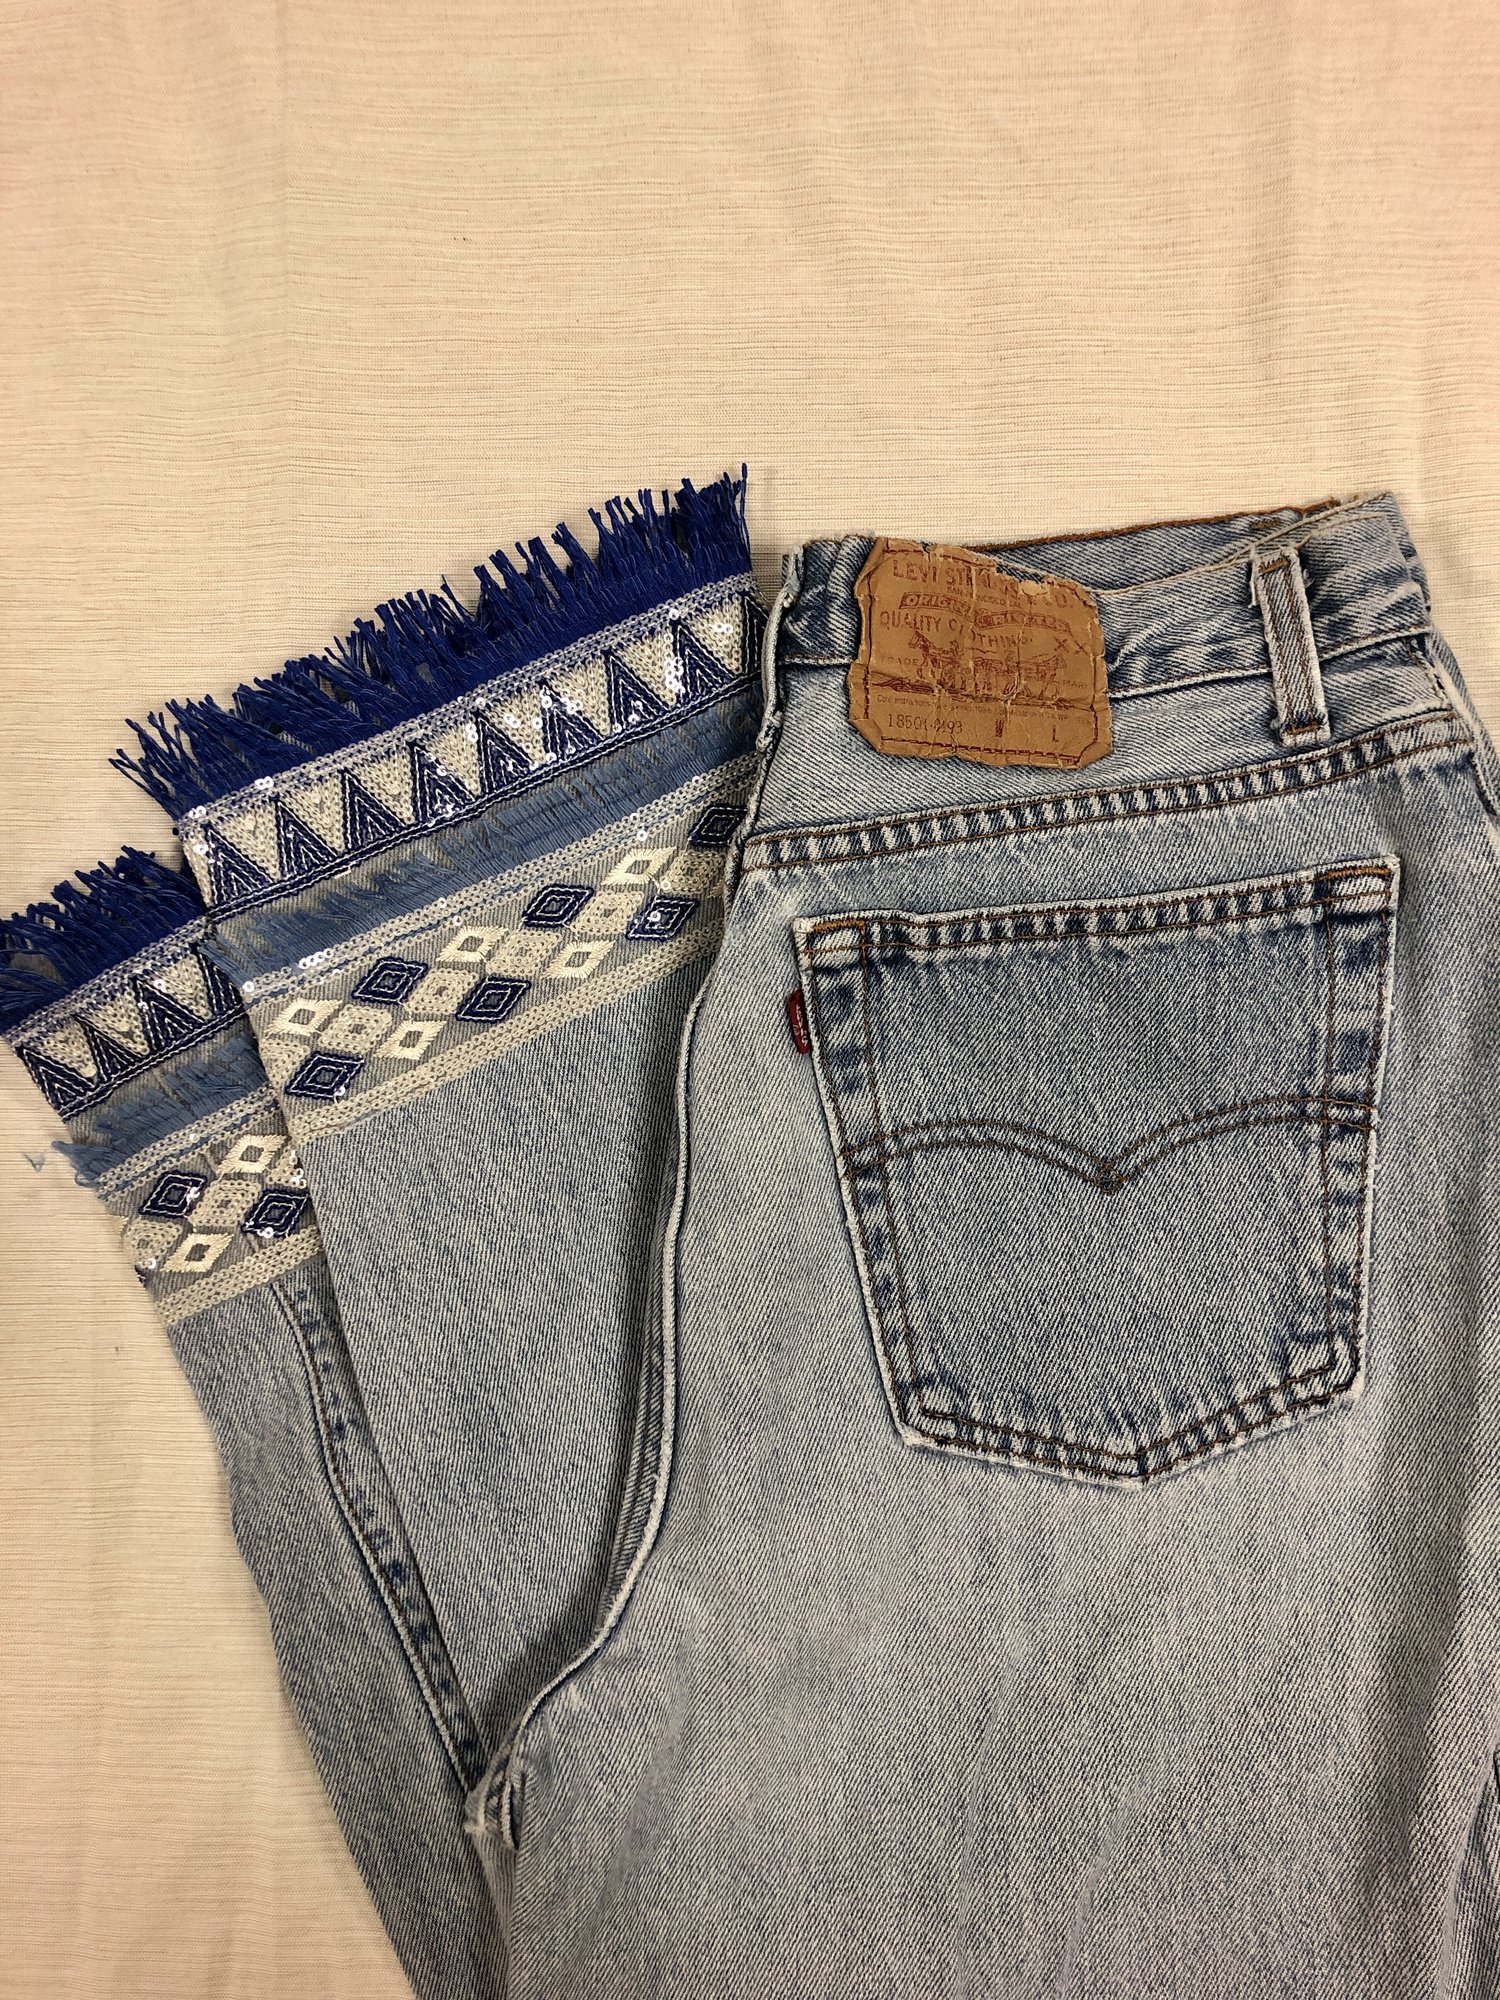 MONARCH CUSTOM LEVIS - Stitched Up